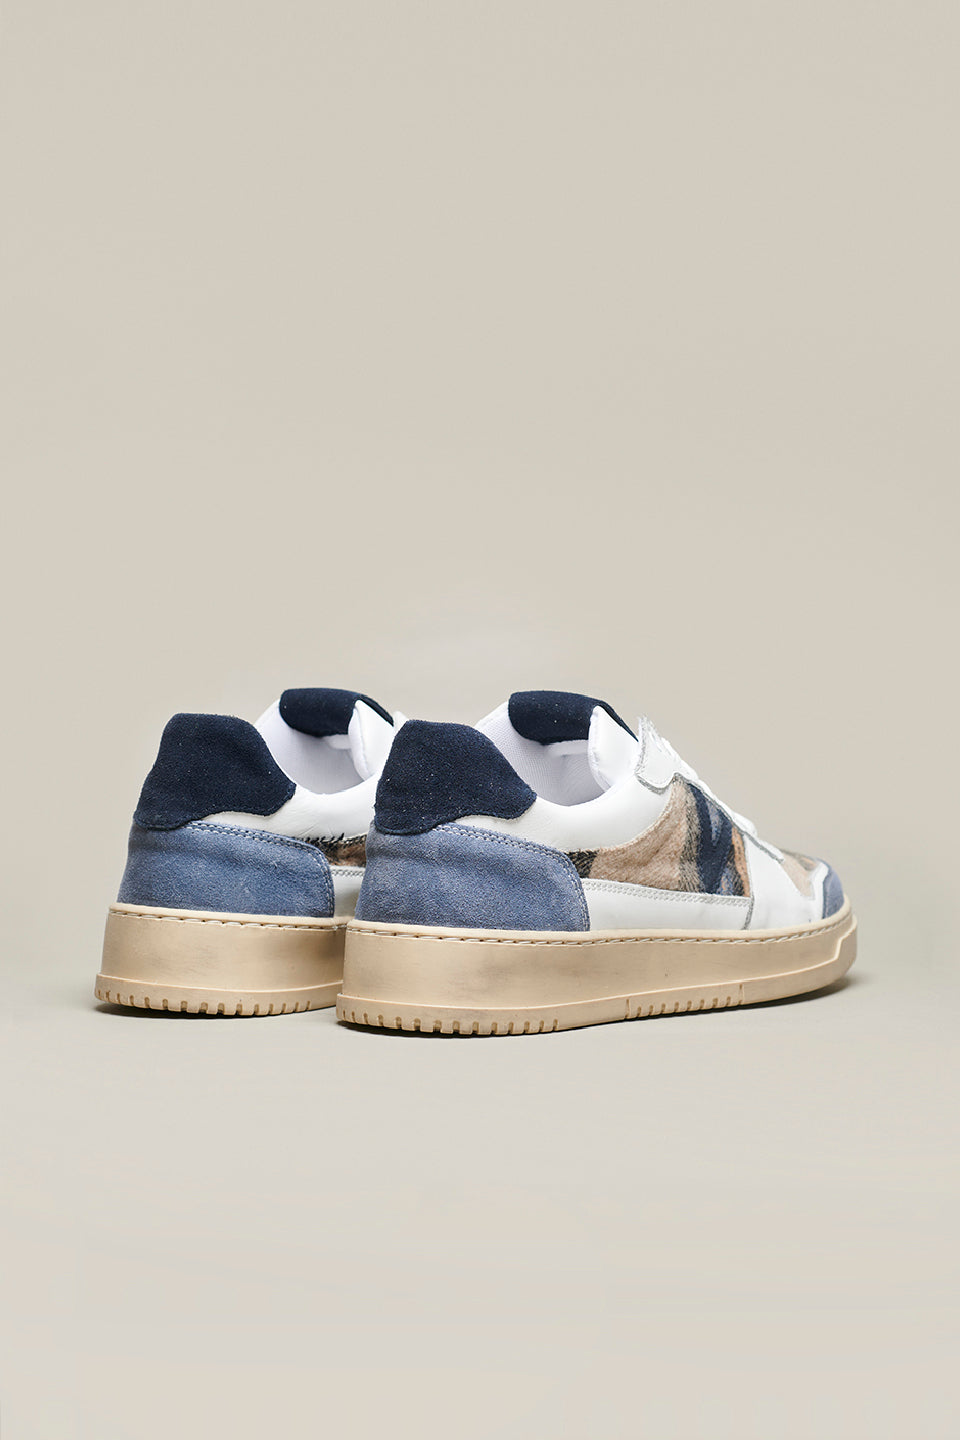 COLLEGE - White sneakers with blue suede back and V2 Scottish fabric inserts